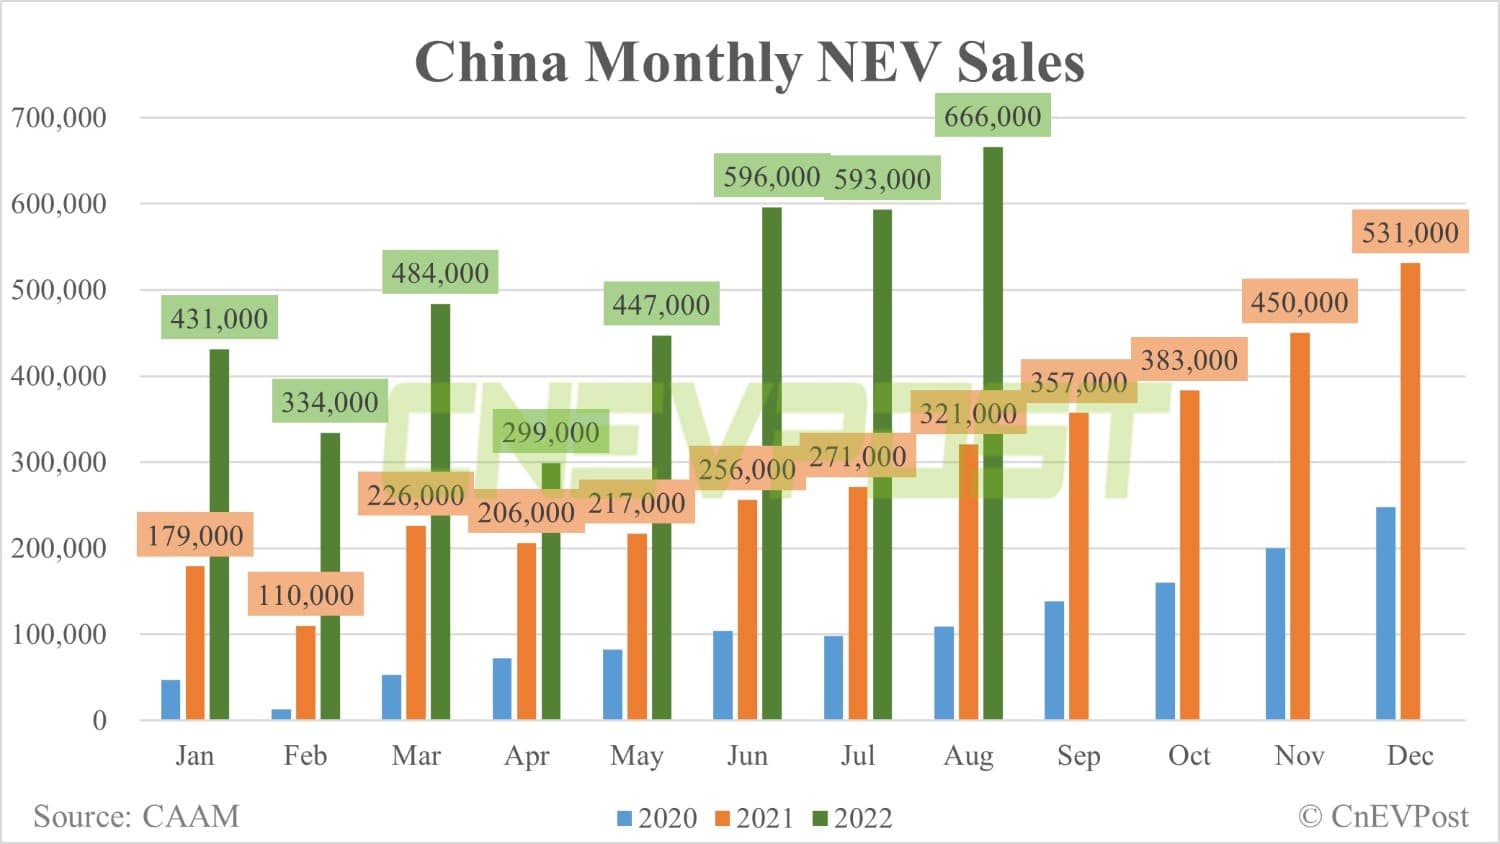 China sees record NEV sales of 666,000 in Aug, CAAM data show-CnEVPost